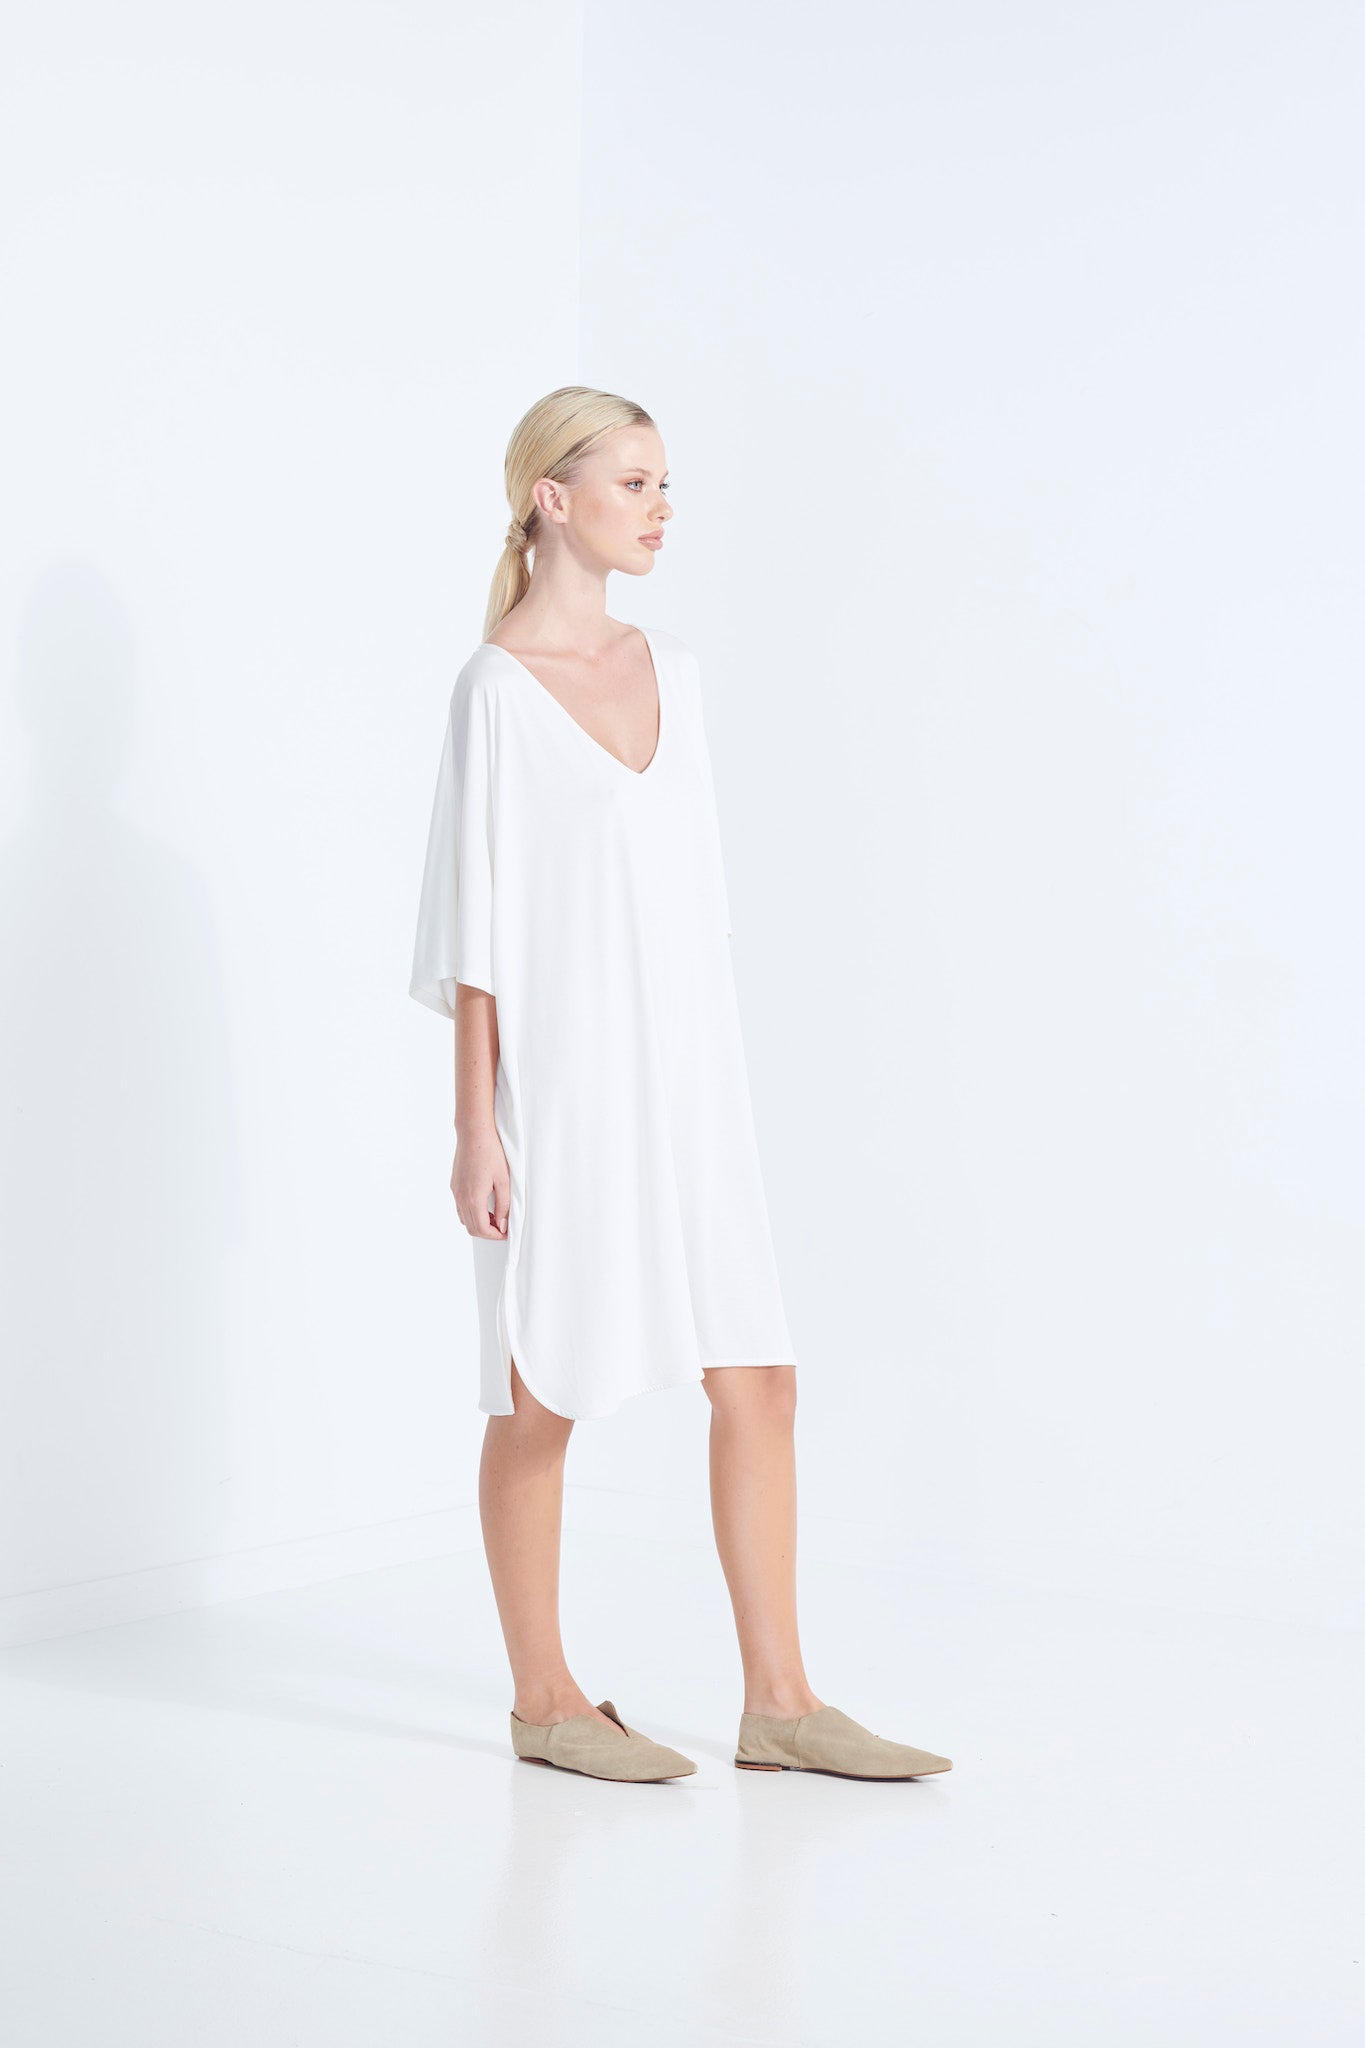 THEMIS DRESS LONGLINE T-SHIRT BEECHWOOD MODAL STRETCH WITH REMOVABLE TIE DEW MILKY WHITE  SIDE VIEW